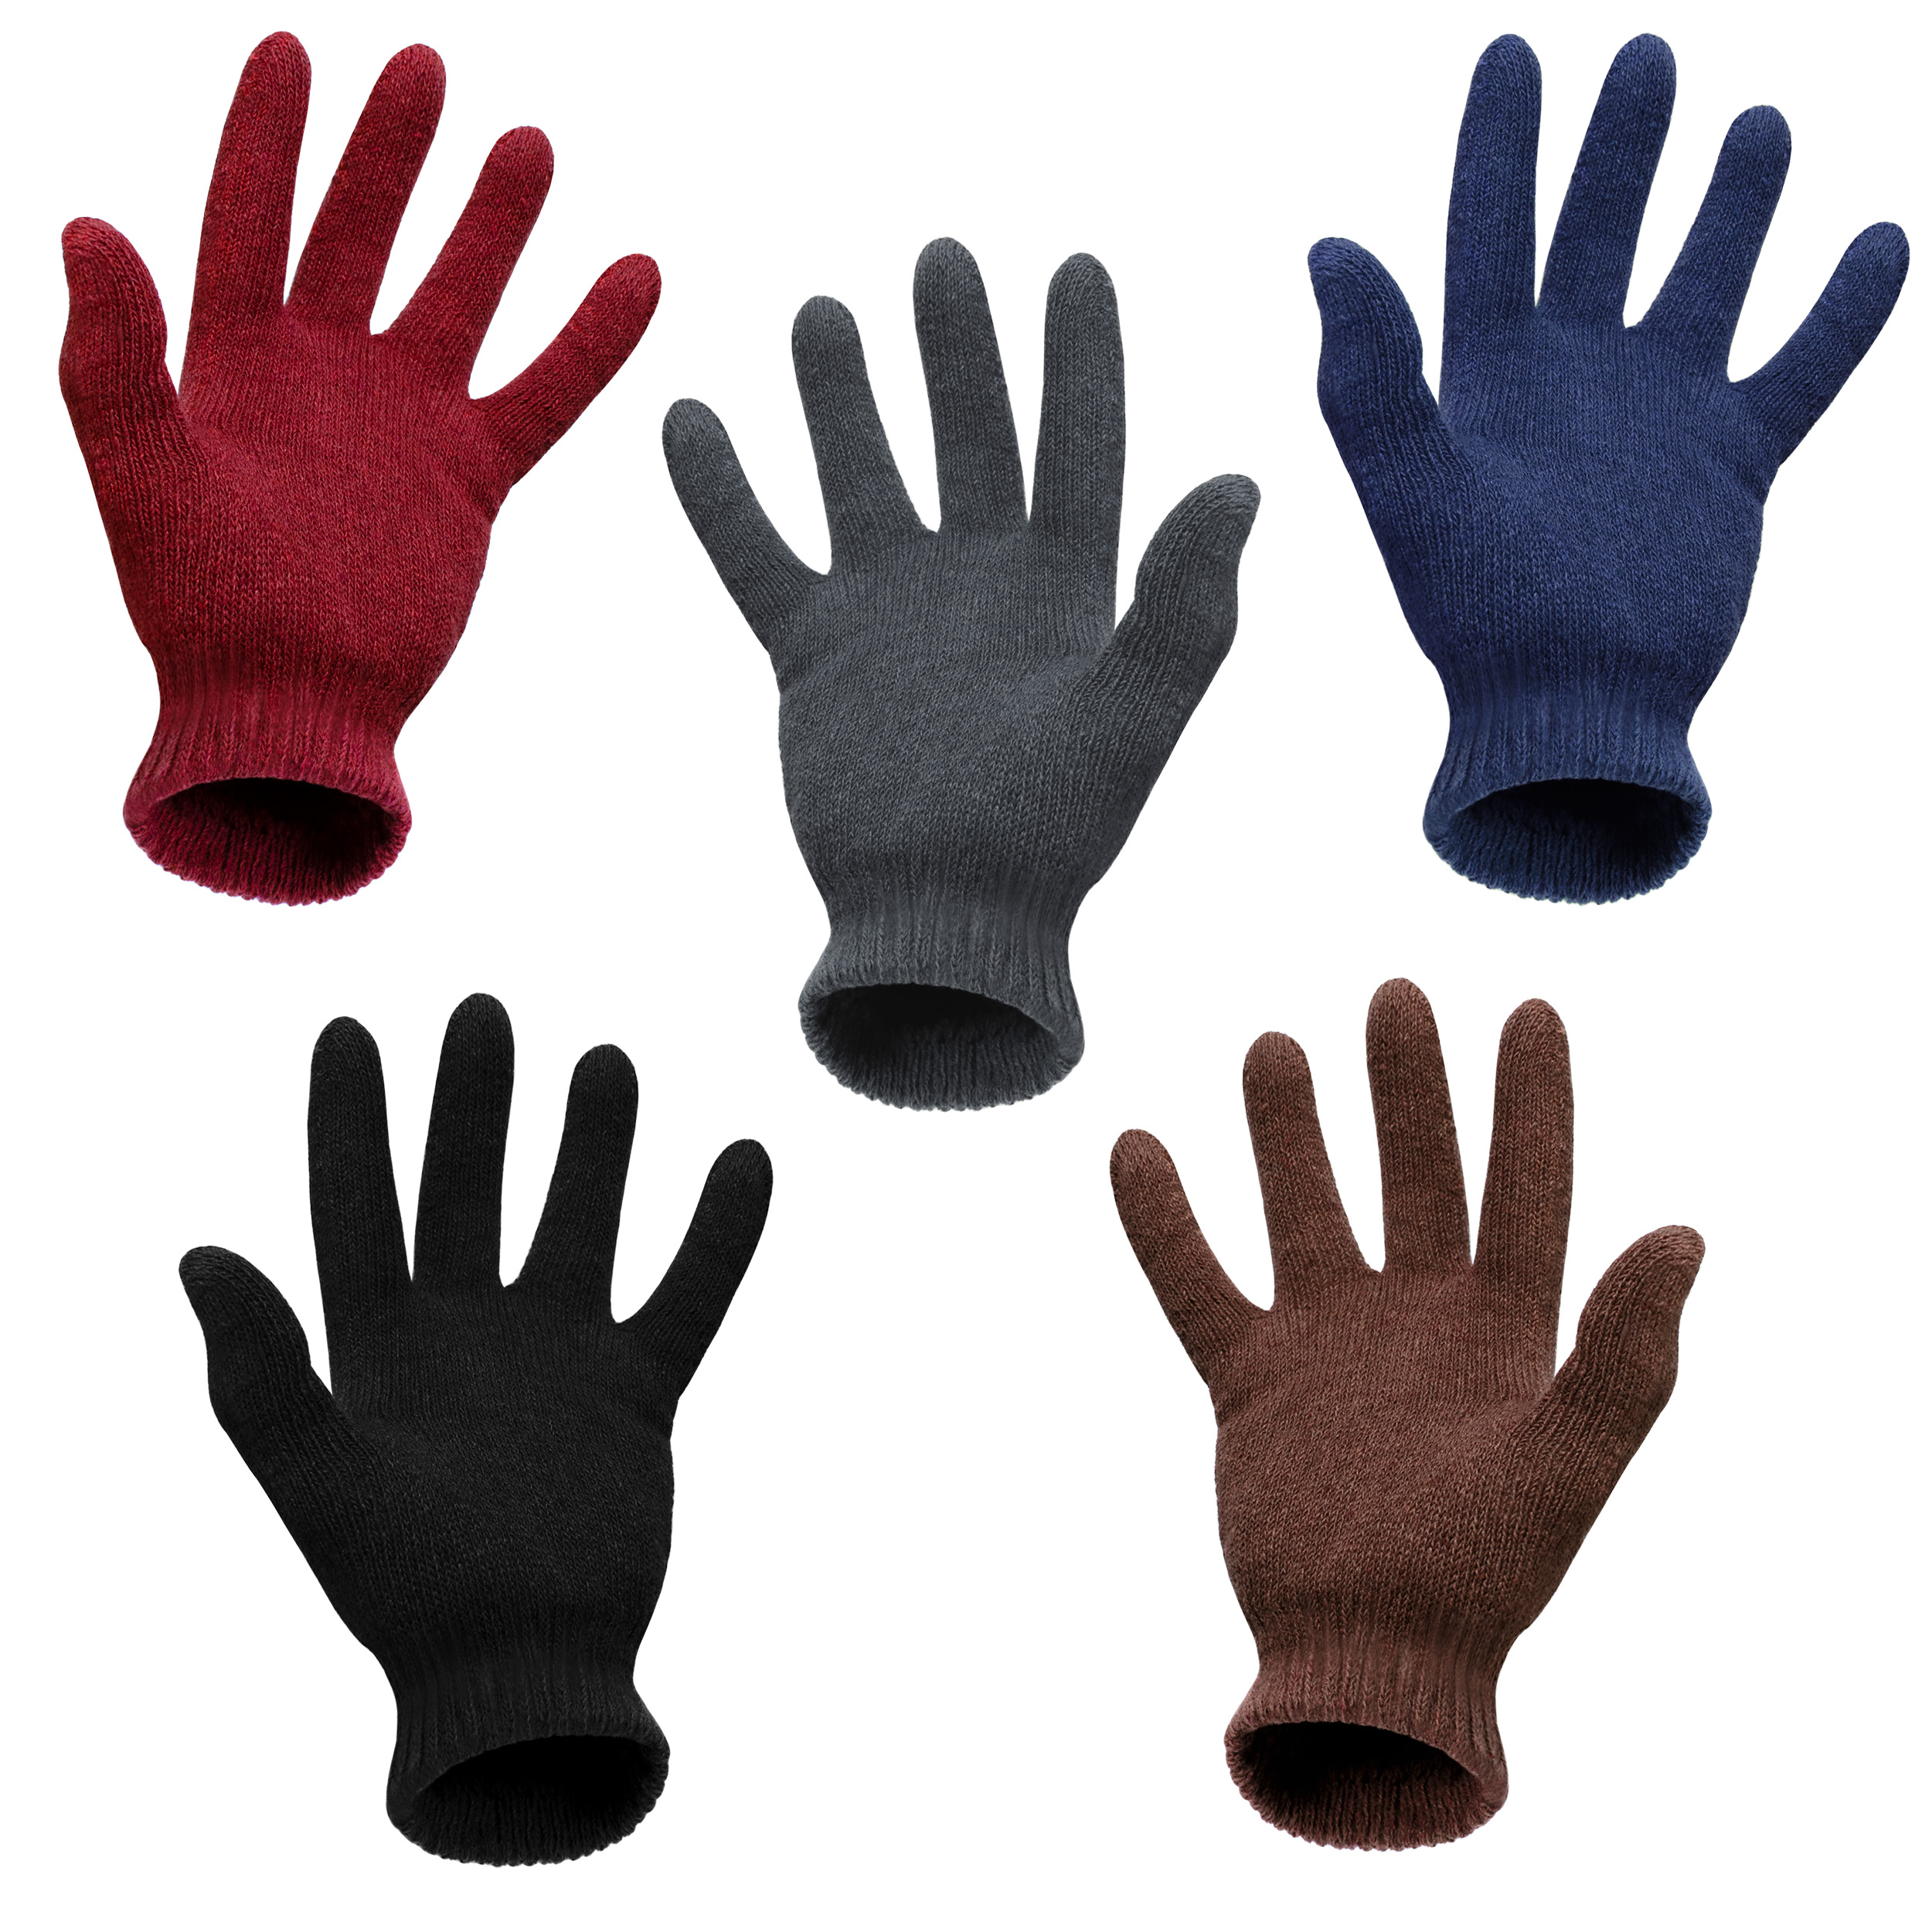 Adult Winter GLOVES - Assorted Colors - One Size Fit Most